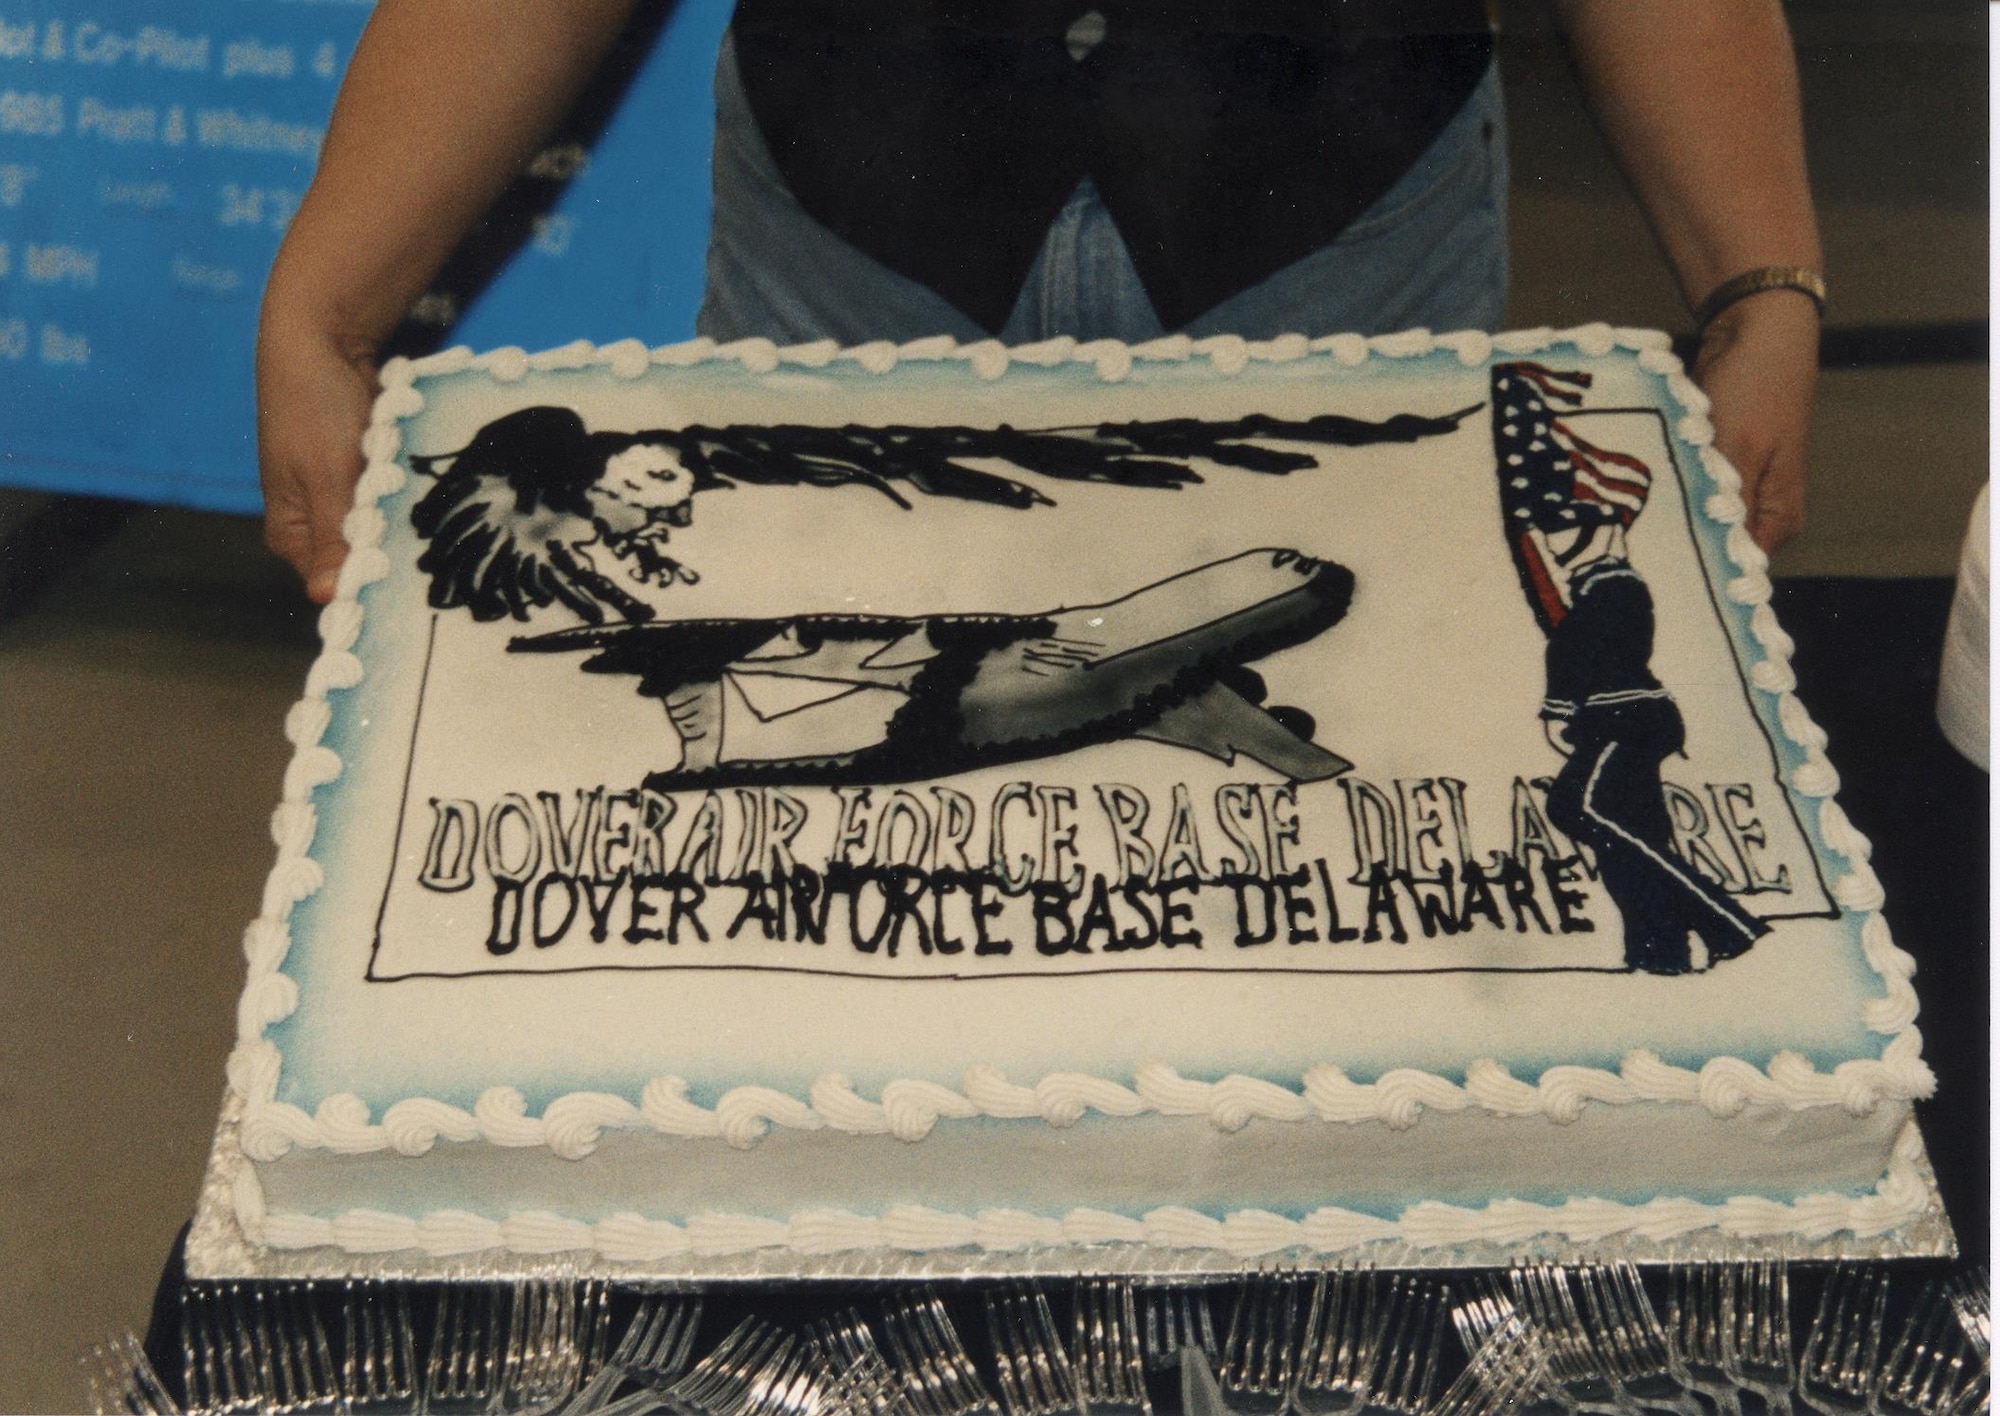 A birthday cake commemorating the 50th anniversary of the creation the U.S. Air Force sits on display September 1997, at the Air Mobility Command Museum on Dover Air Force Base, Del. Celebrating the anniversary of the Air Force with a birthday cake is a tradition that continues today. (Courtesy photo/Harry Heist) 